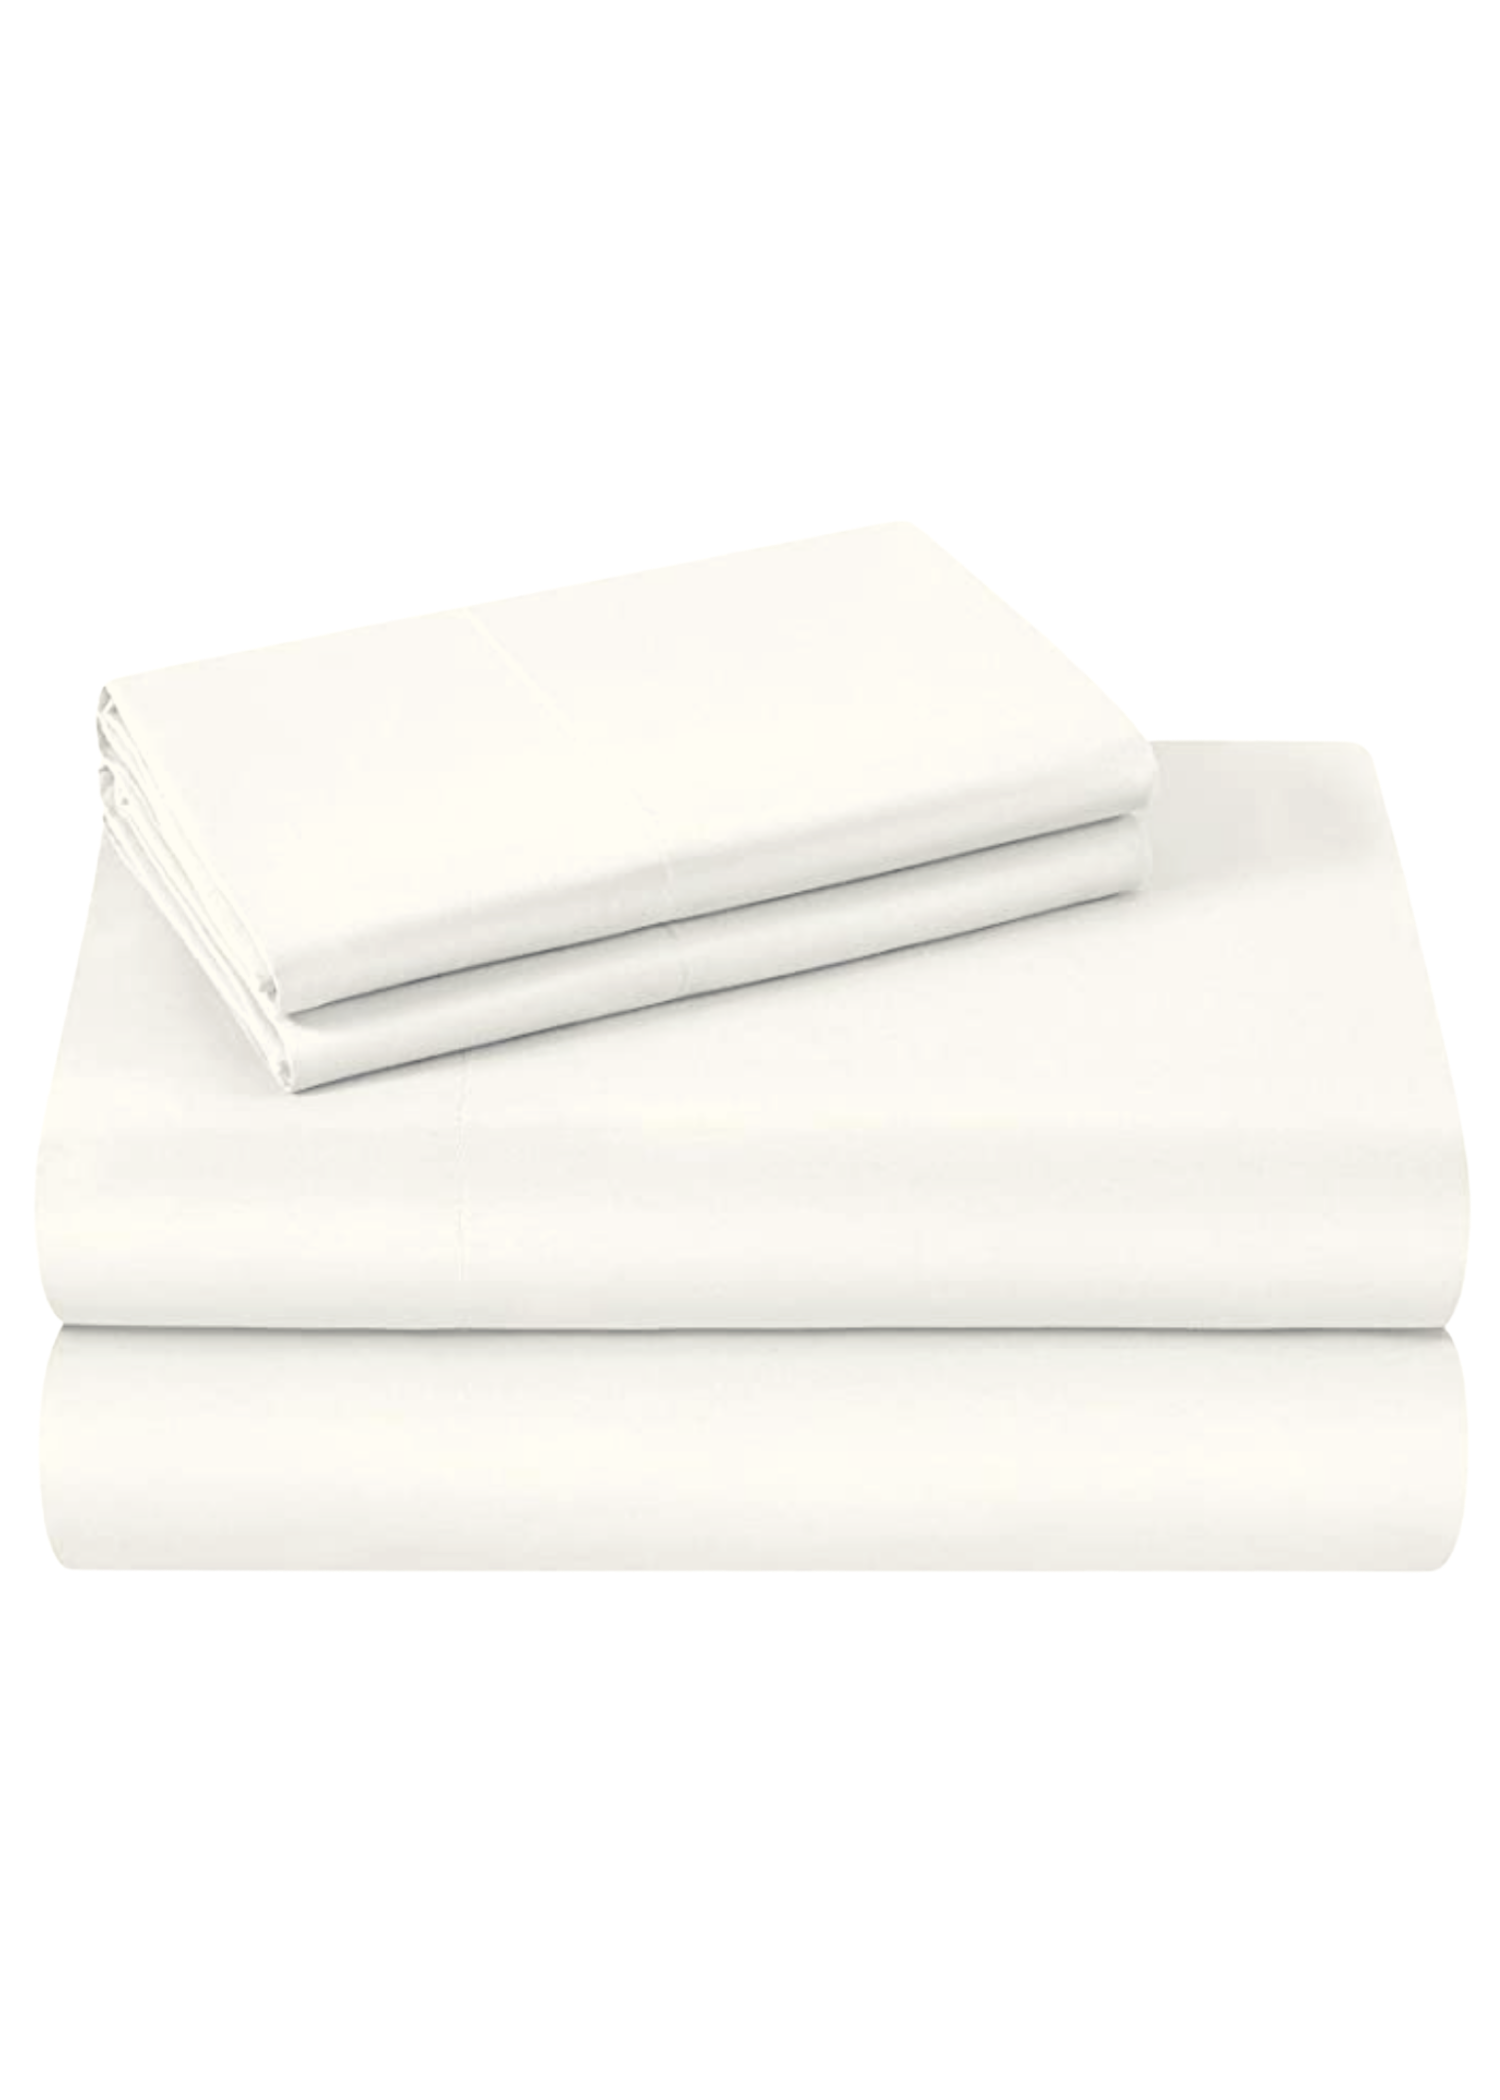 BambooYou Sheets are Soft but not Slippery